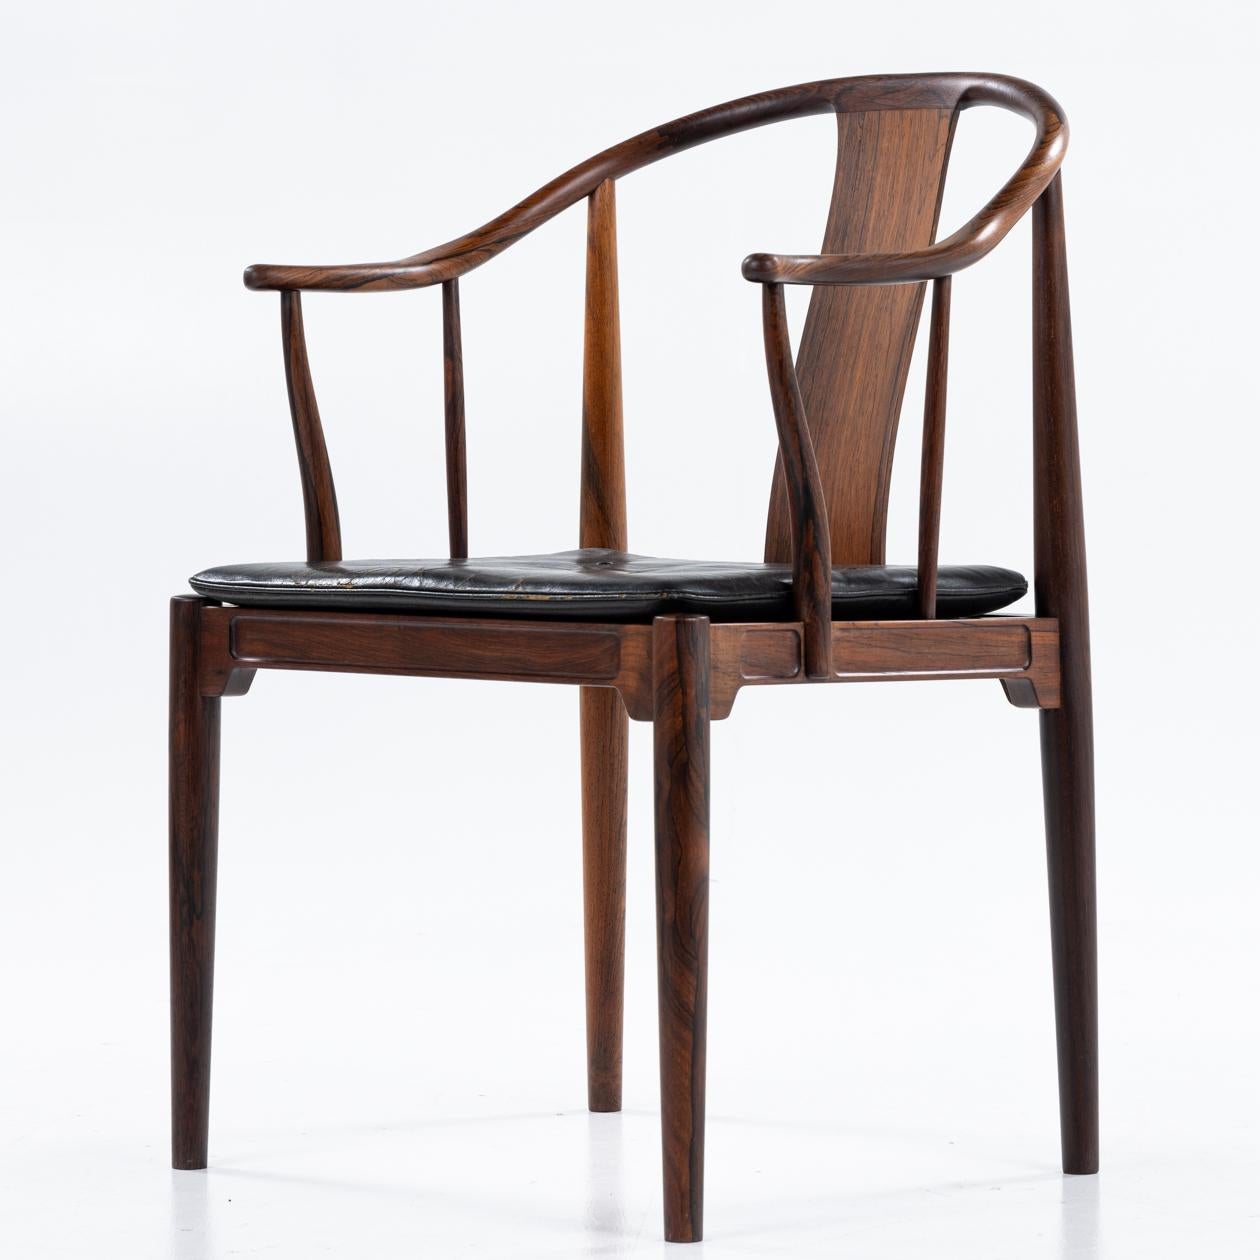 FH 4283 - China chair in Brazilian rosewood with black patinated leather seat.